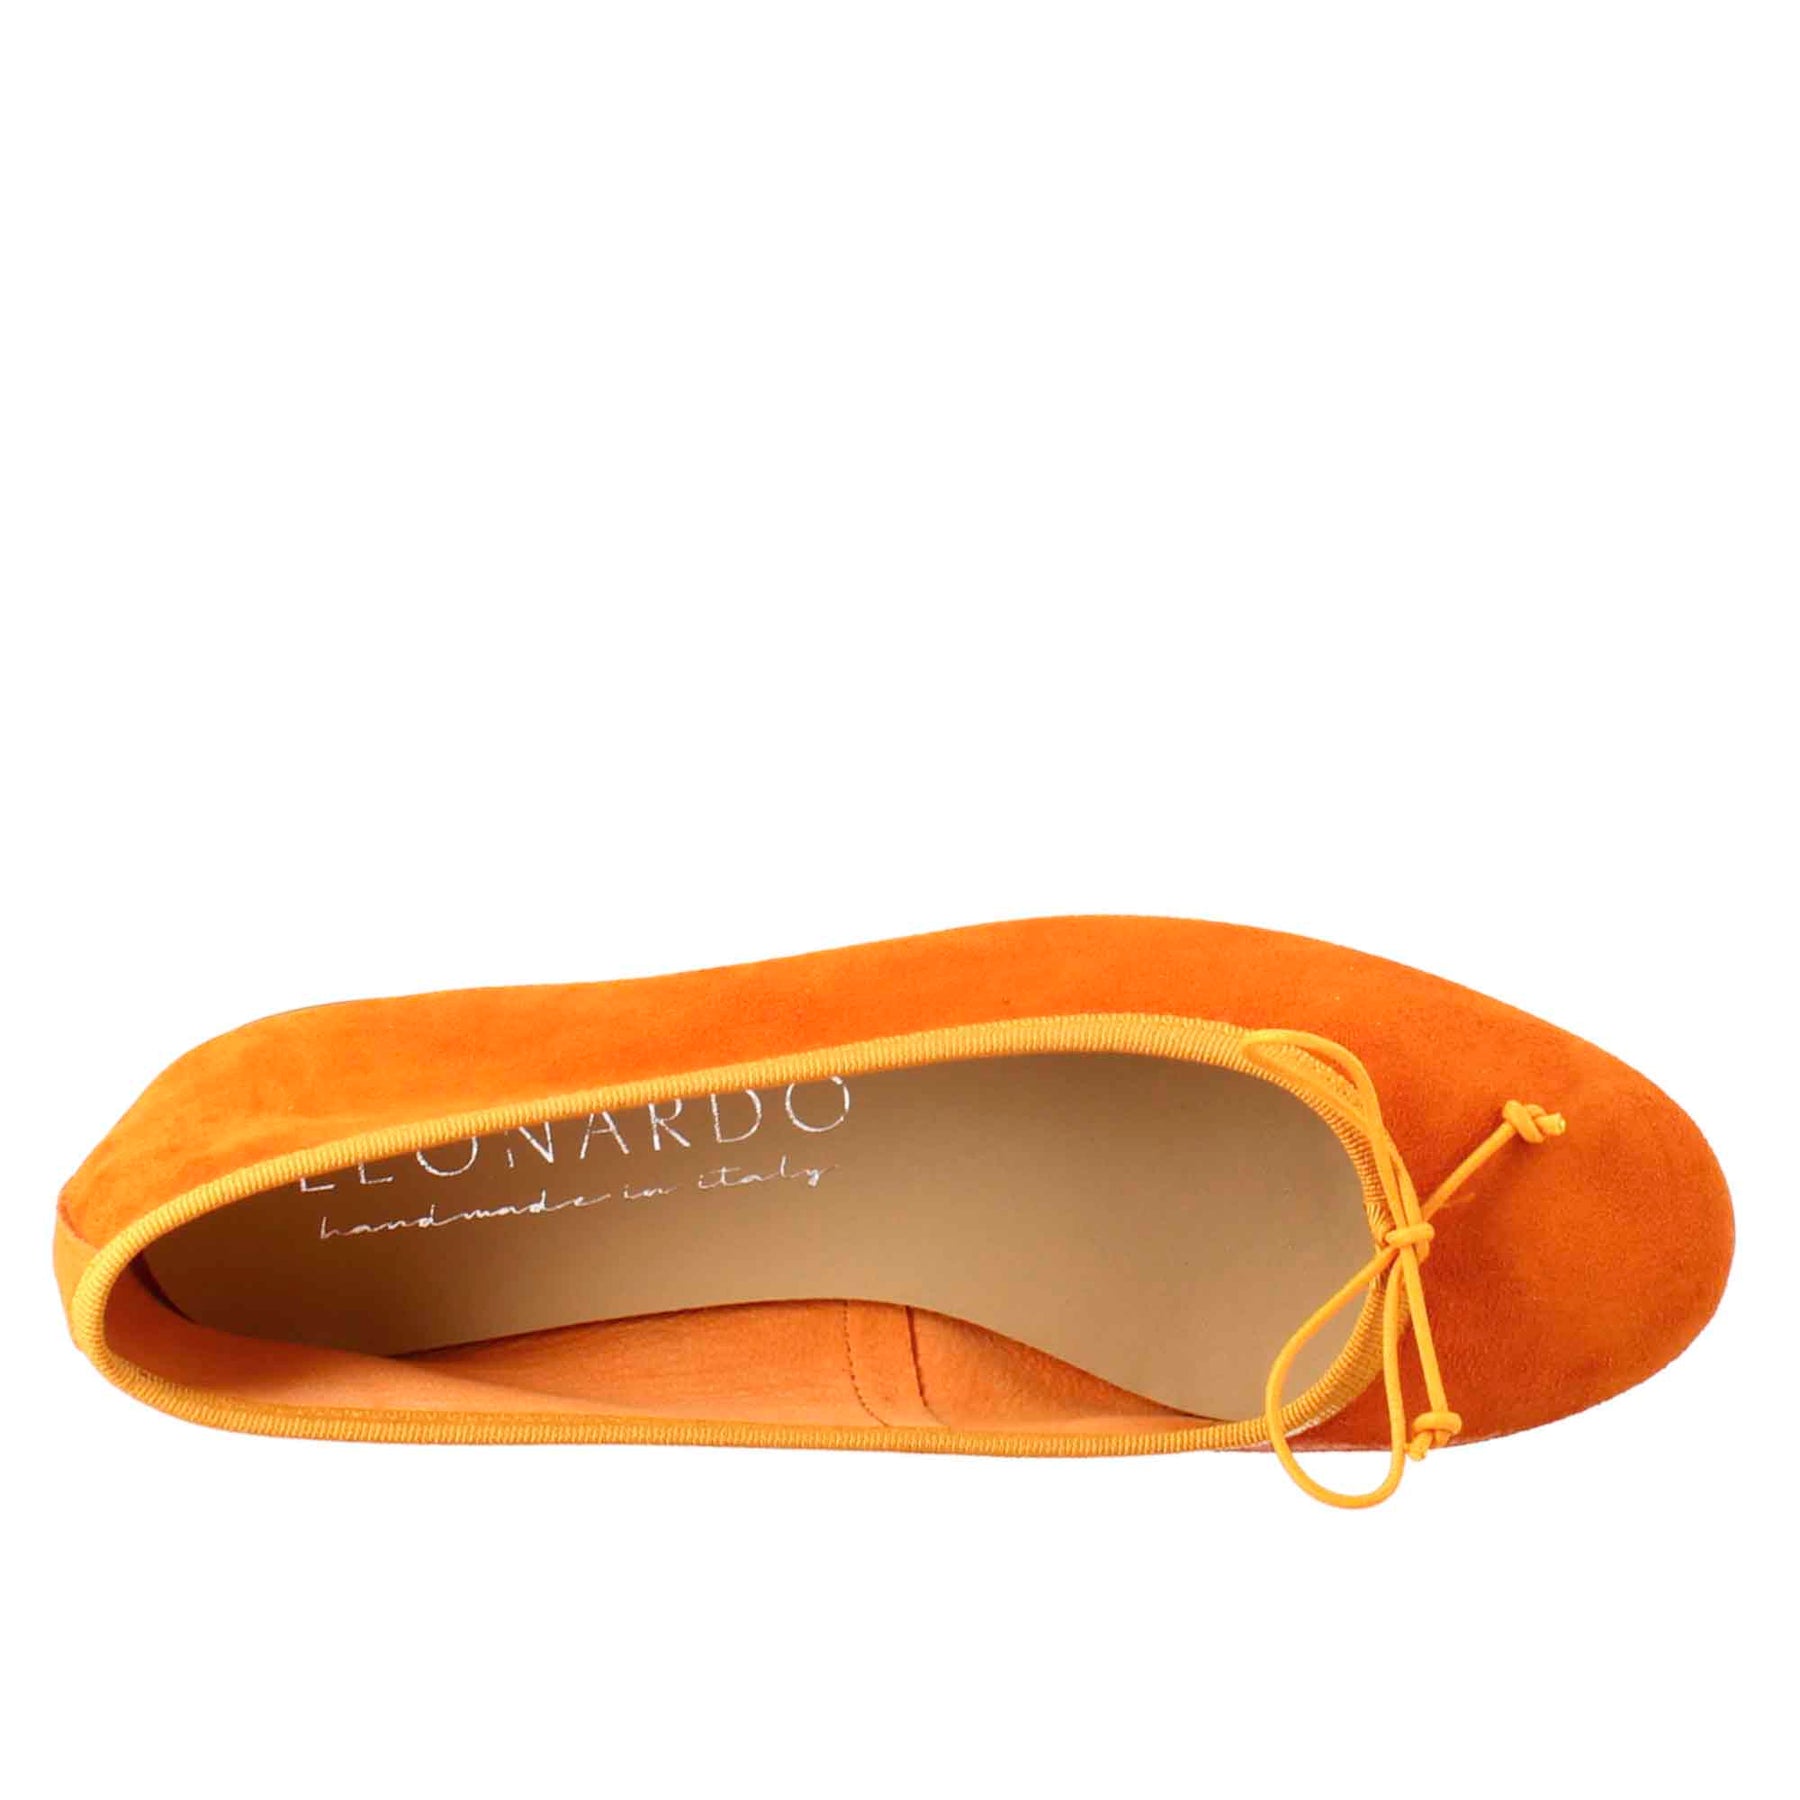 Light orange suede ballet flats for women without lining